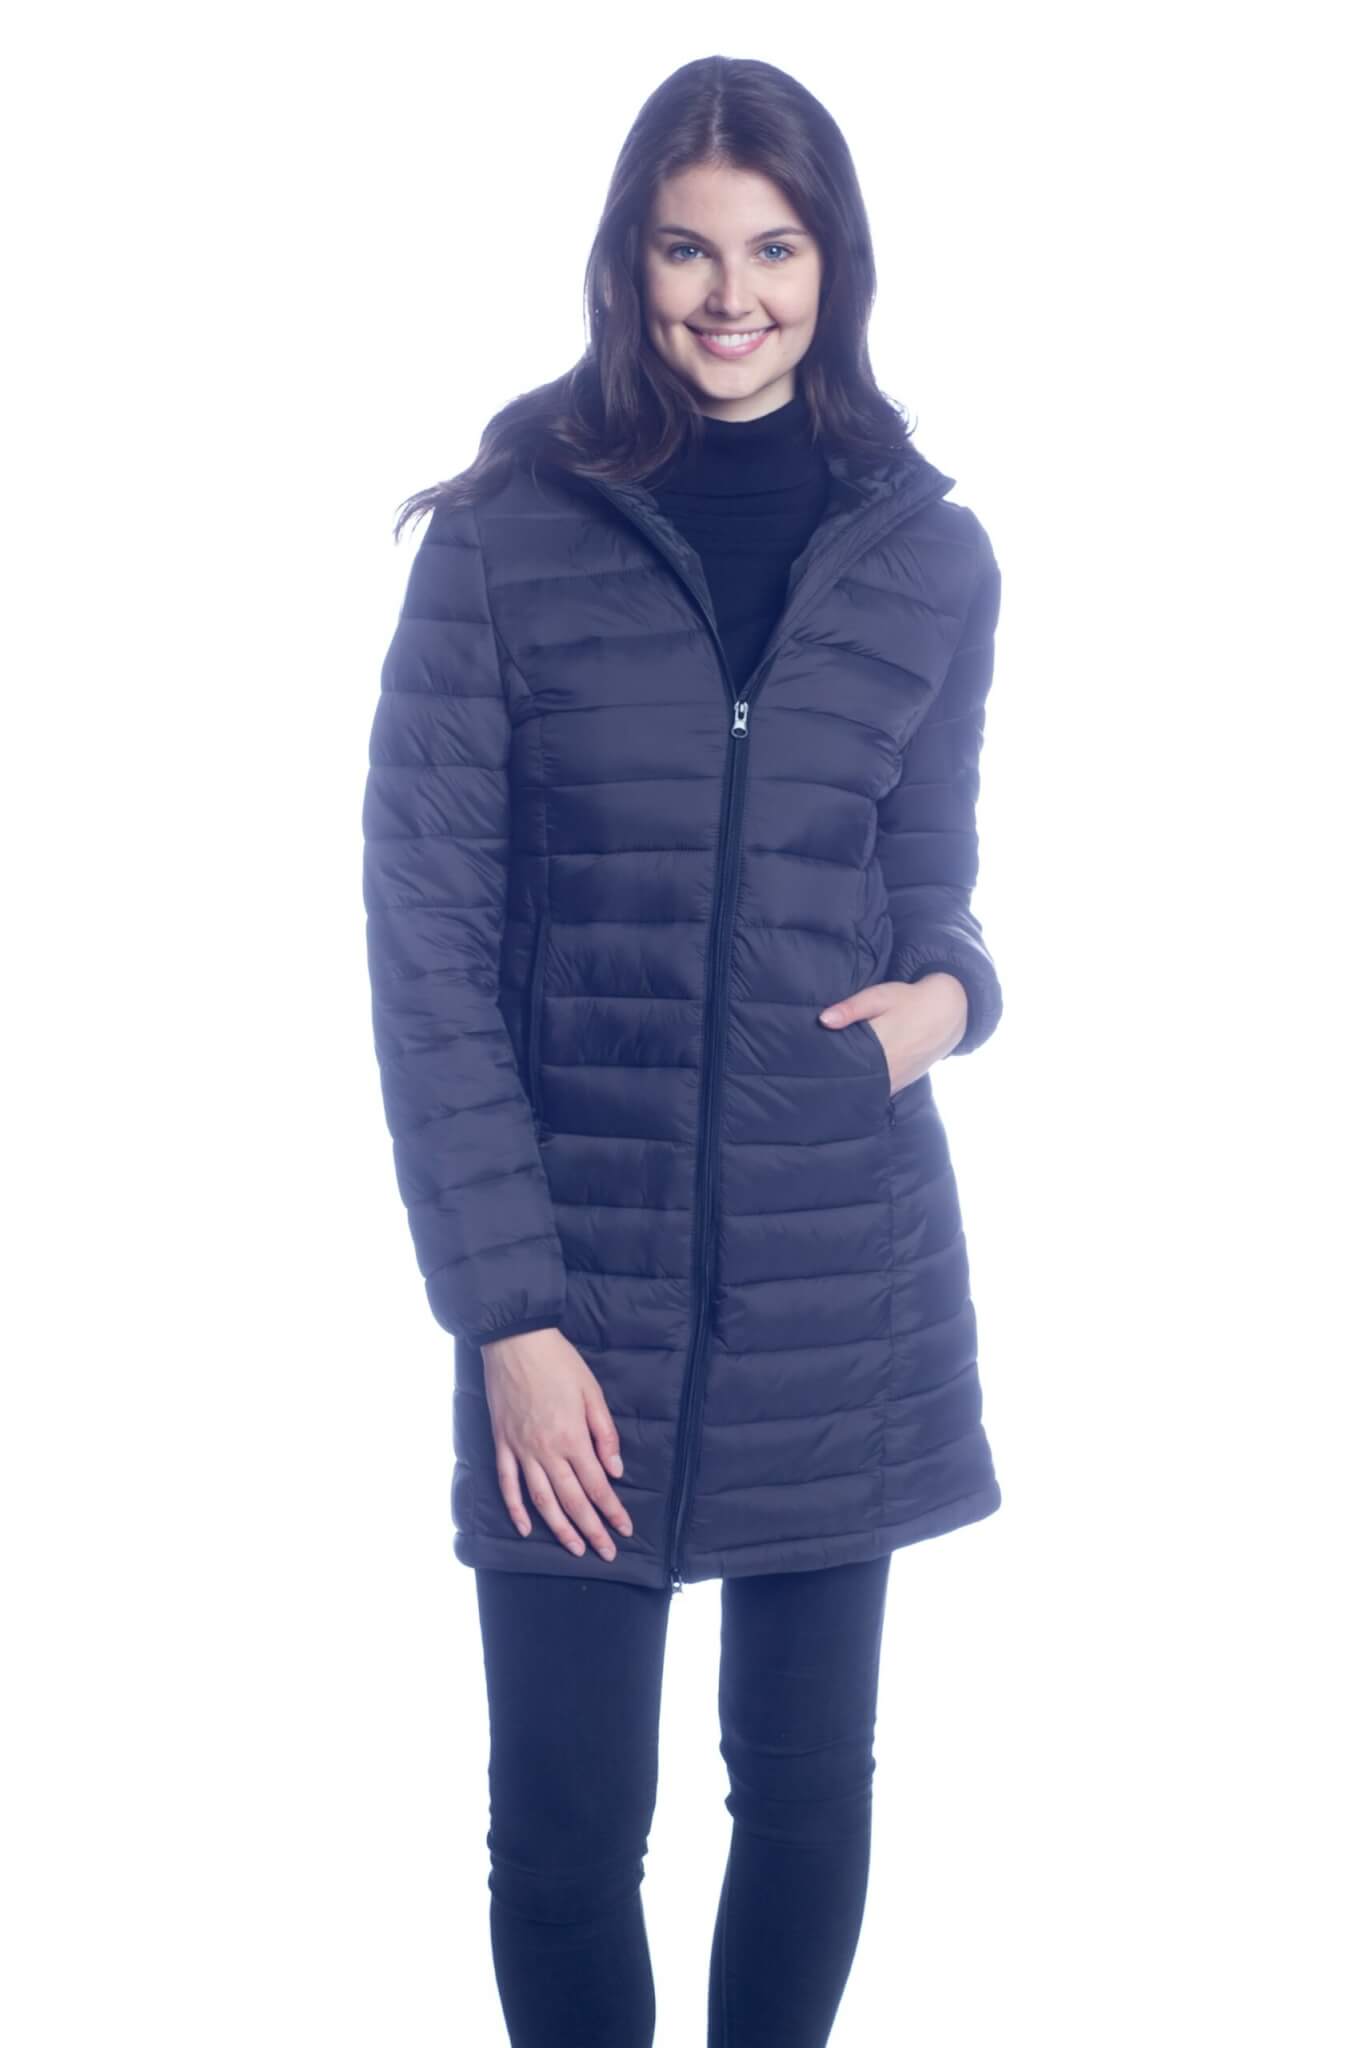 Padded Coat with Hood and Zipper Pockets - DKR & Company Apparel ...